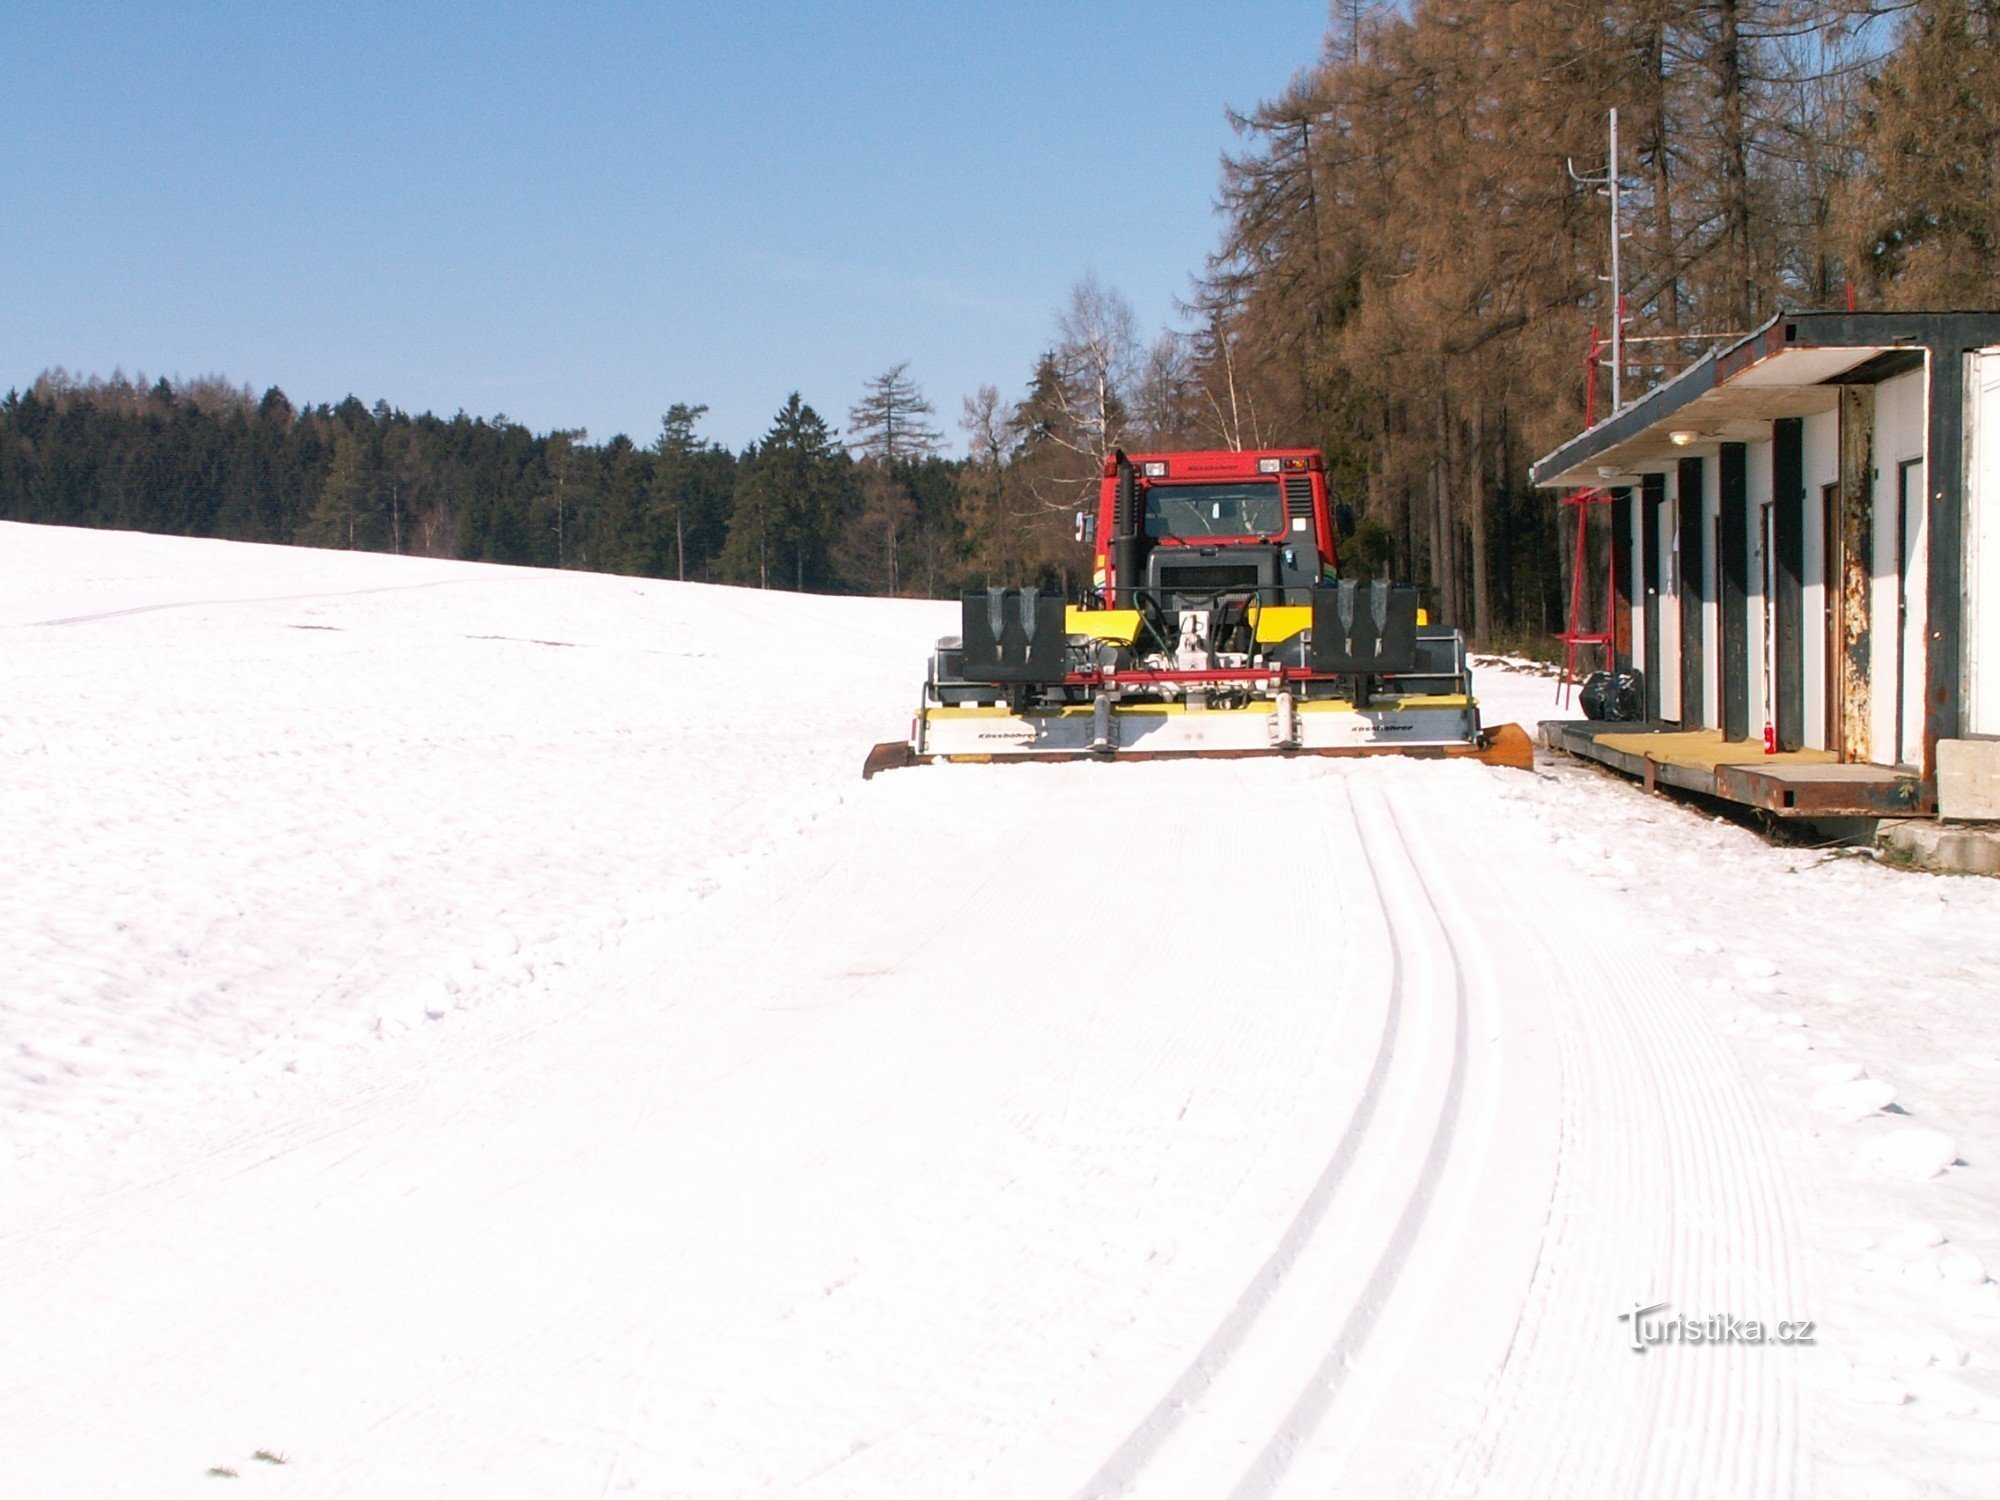 Snowmobile for track maintenance